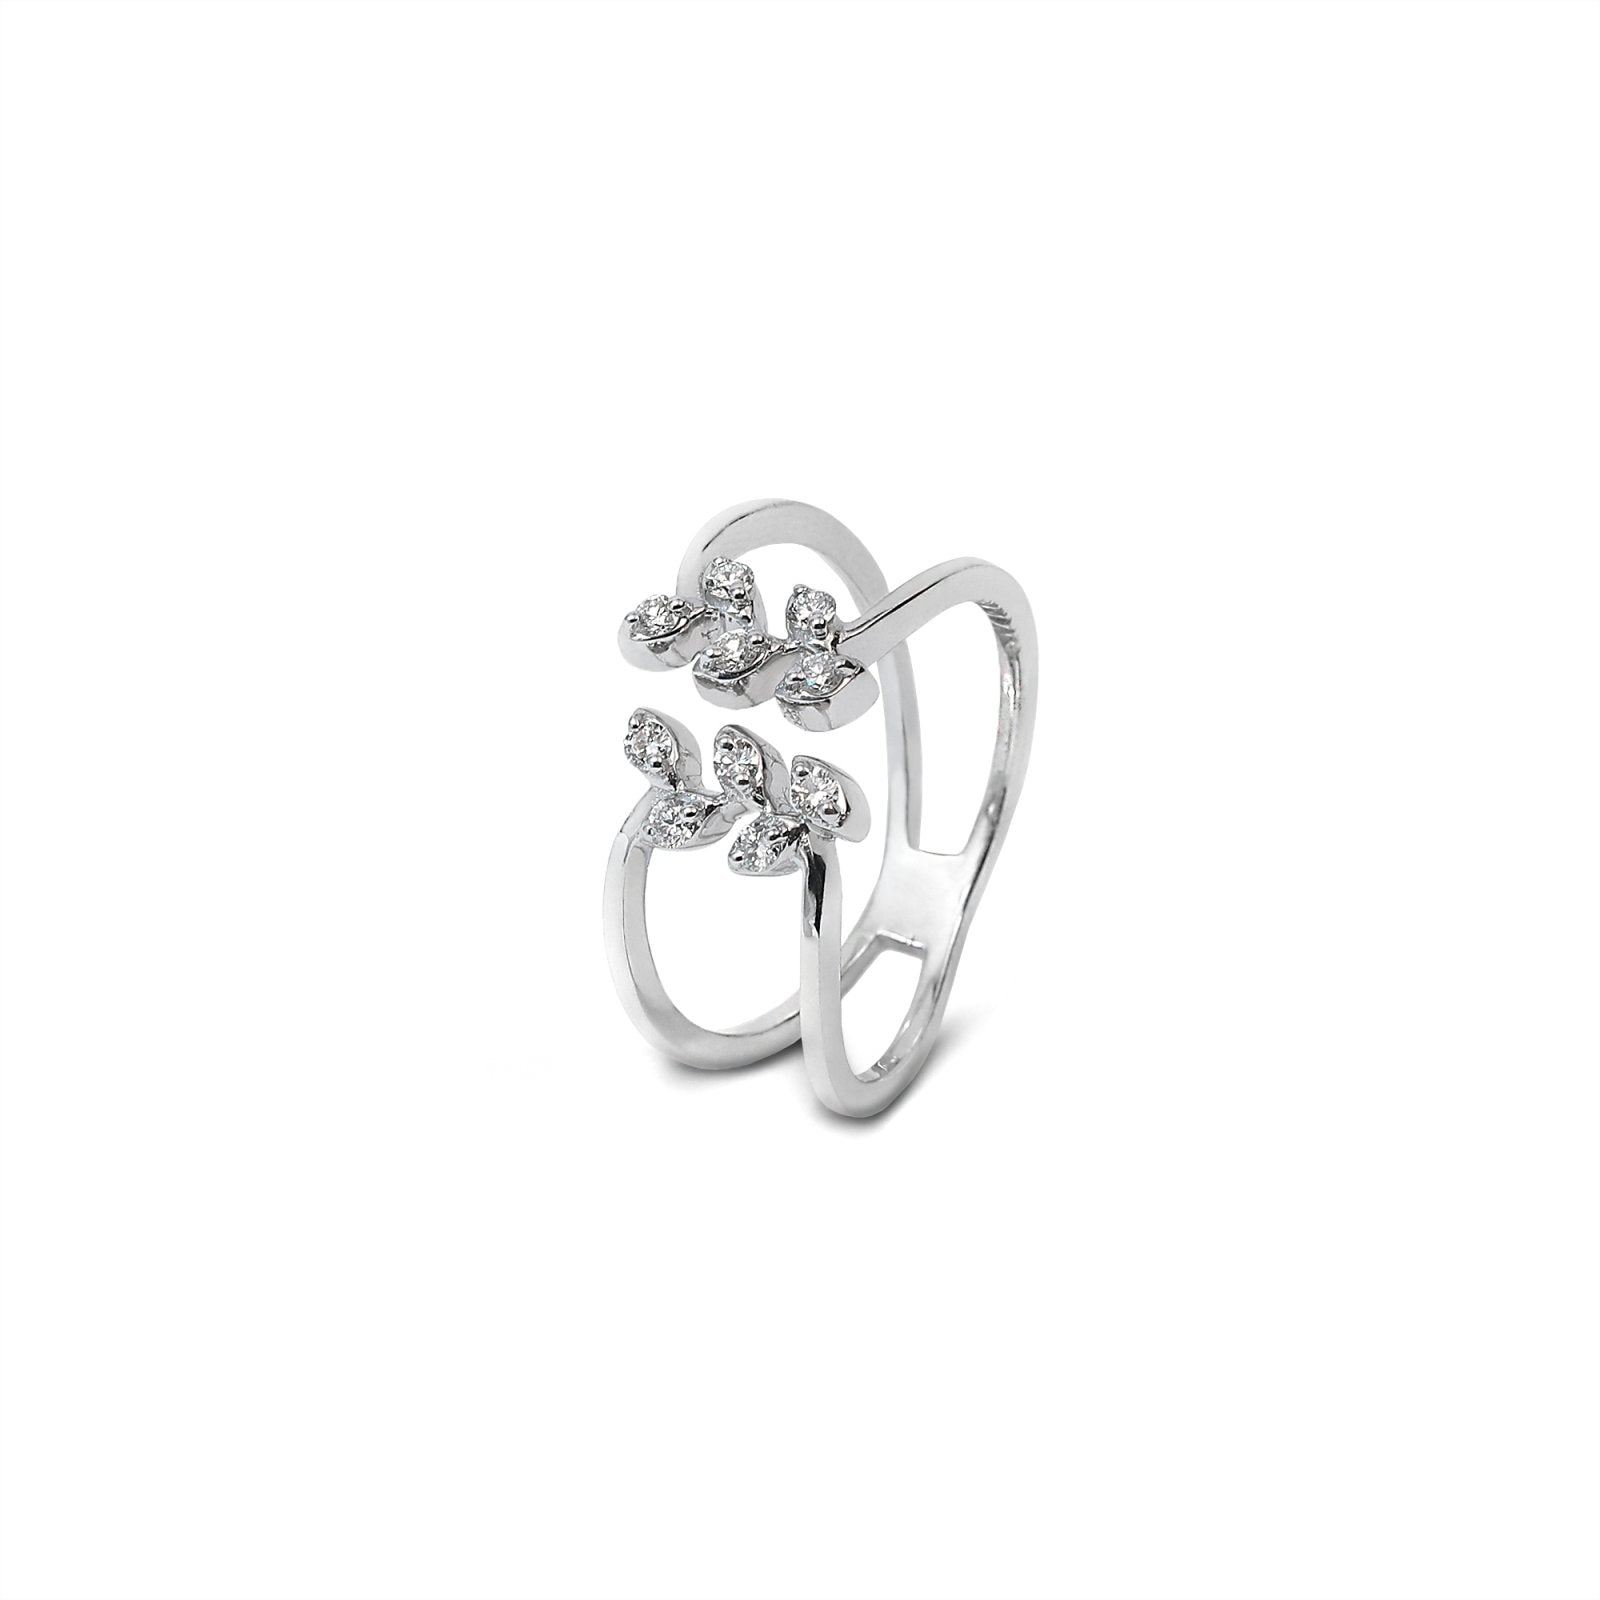 White Gold two Sided Branch style ring setting with Natural Round Diamonds 14k TDW:0.22ct VS GH 3.32gr